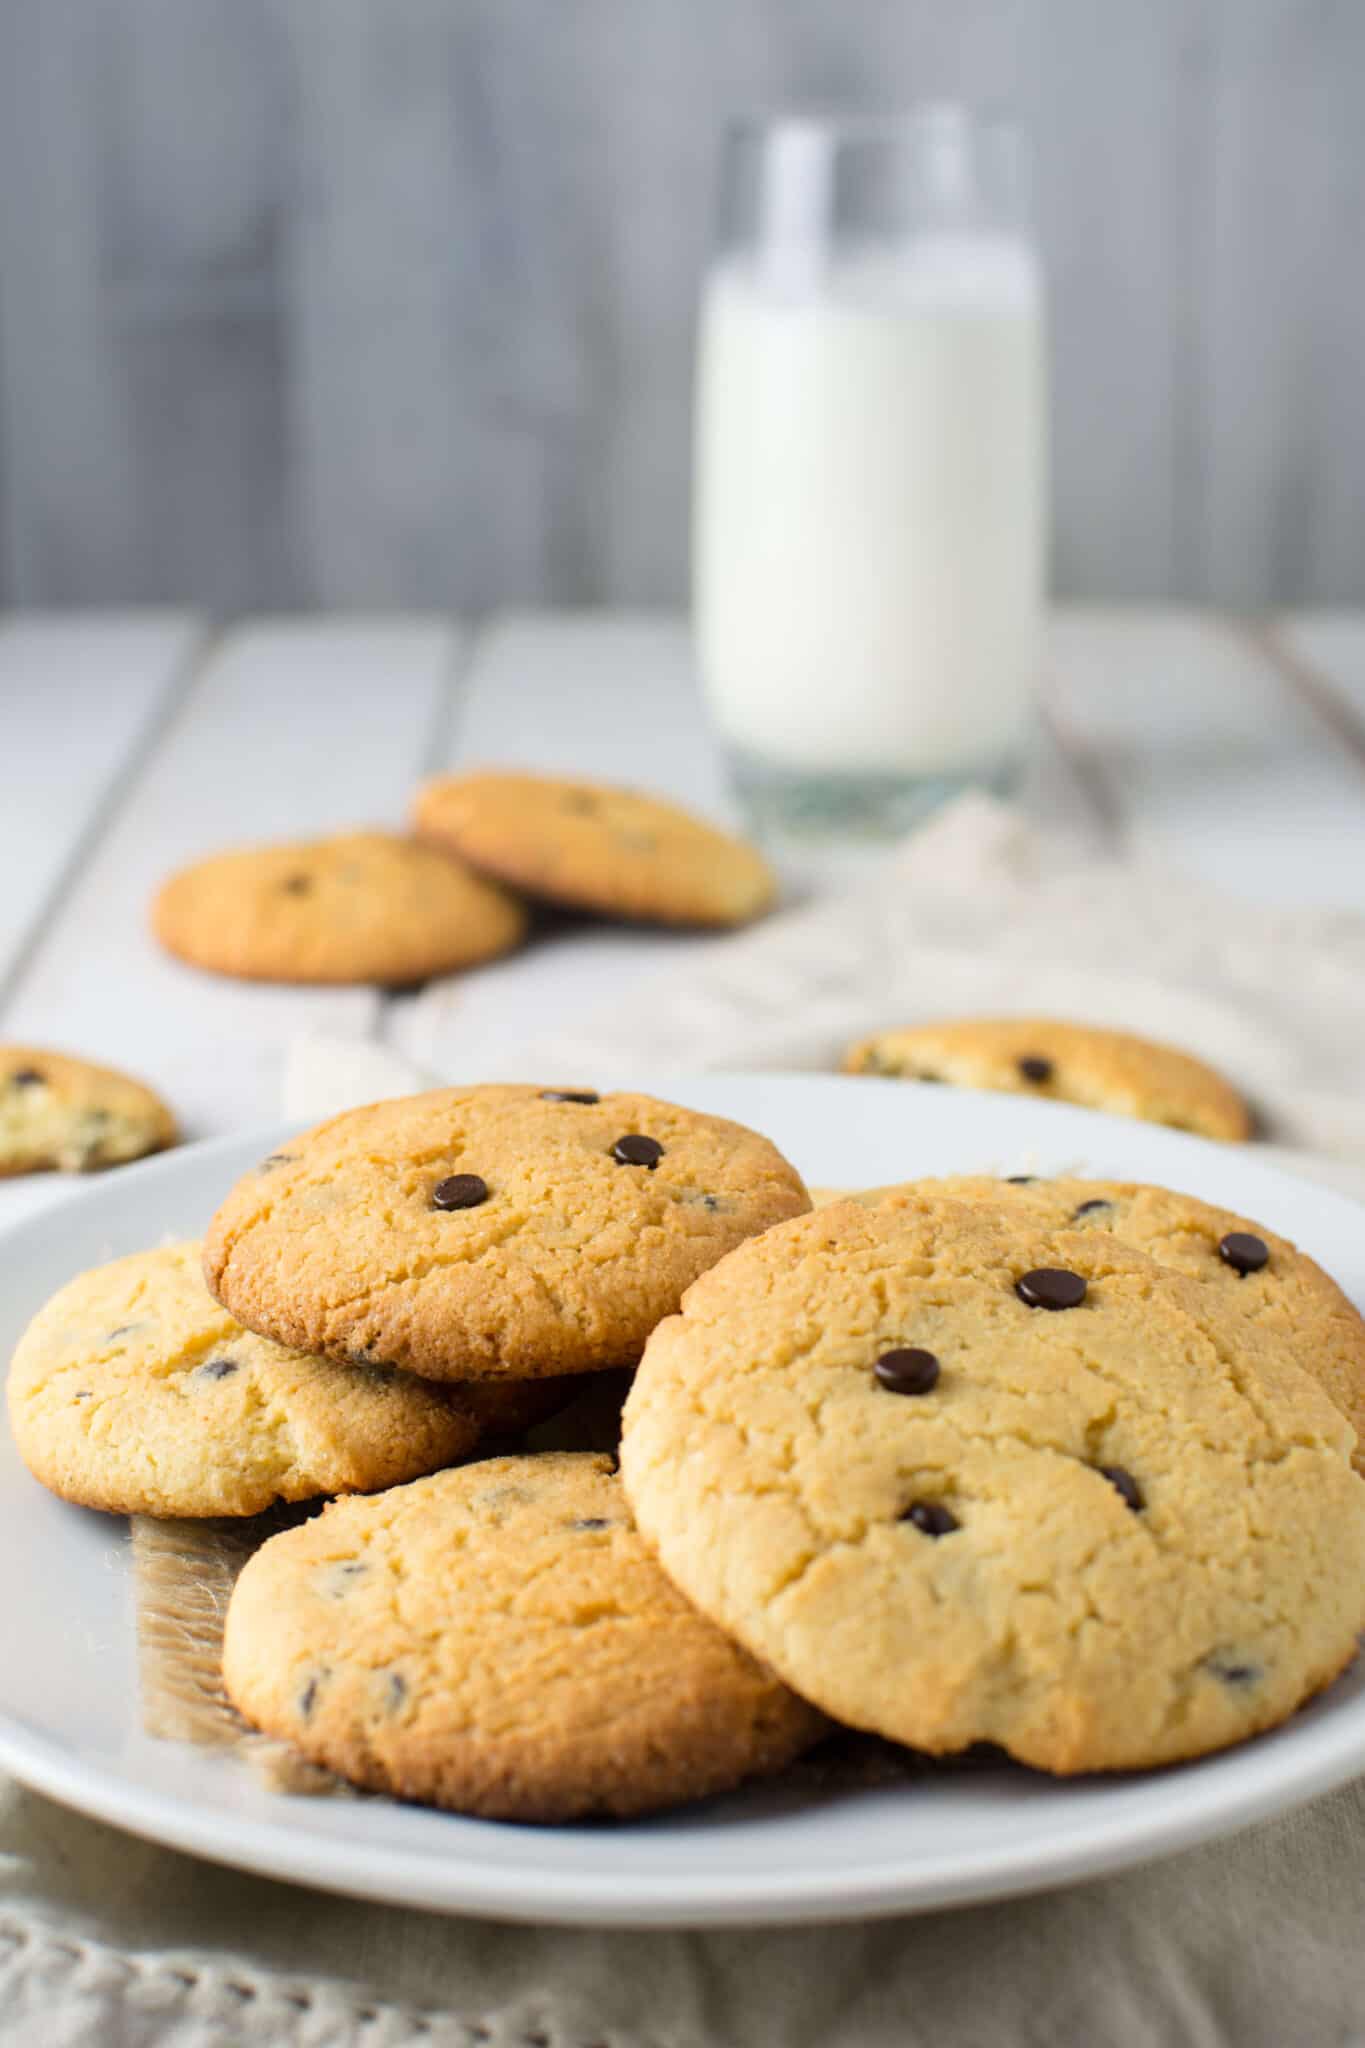 Keto Chocolate Chip Cookies With Xanthan Gum - Oh So Foodie